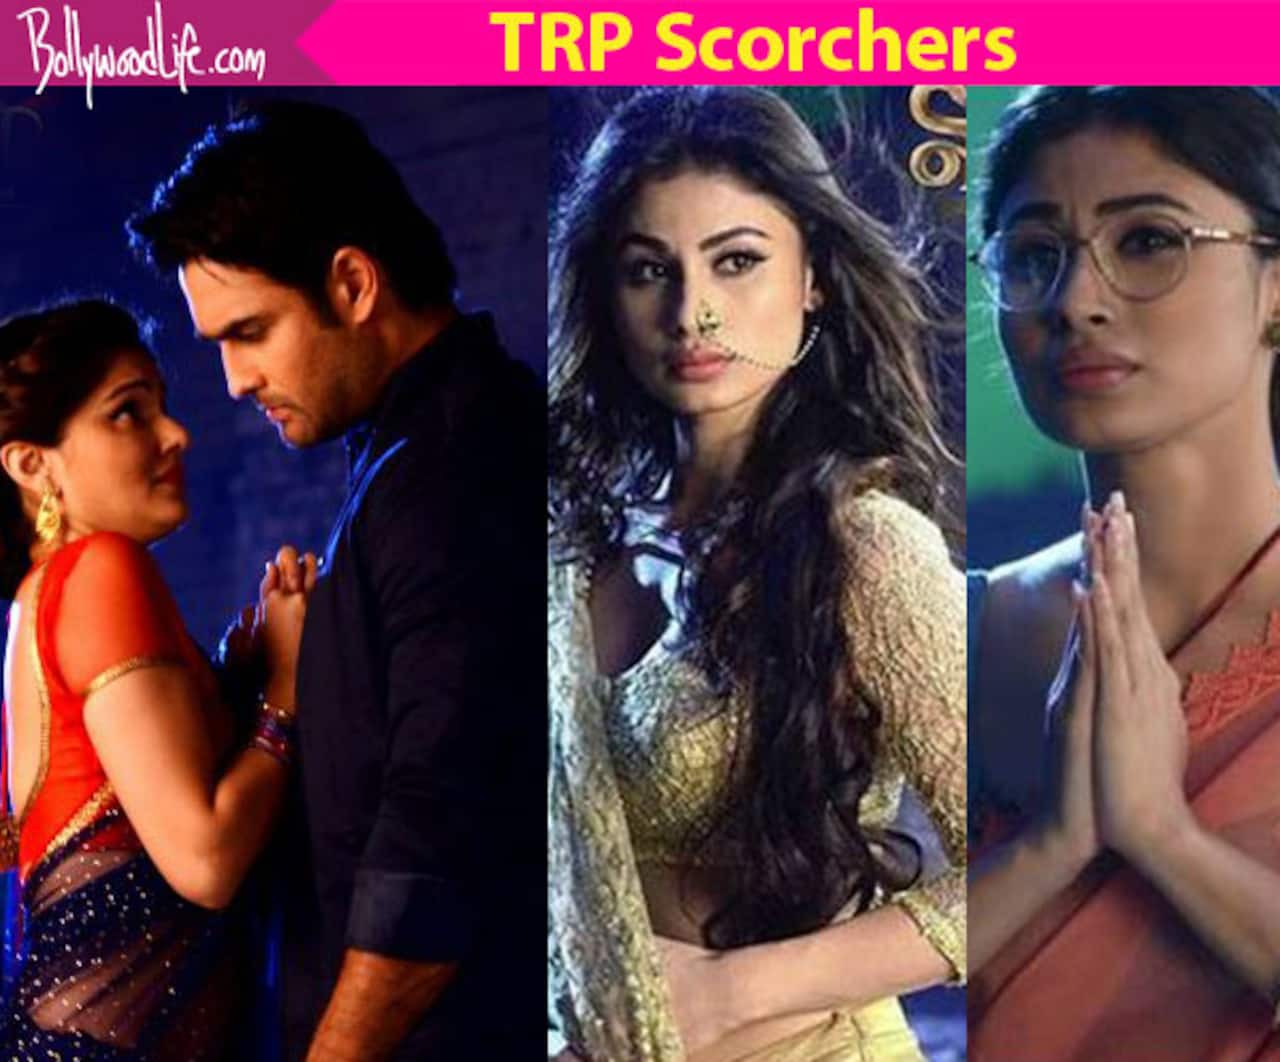 BARC Report Week 42: Naagin 2 retains its grip on the top slot while Yeh Hai Mohabbatein jumps back into top 5